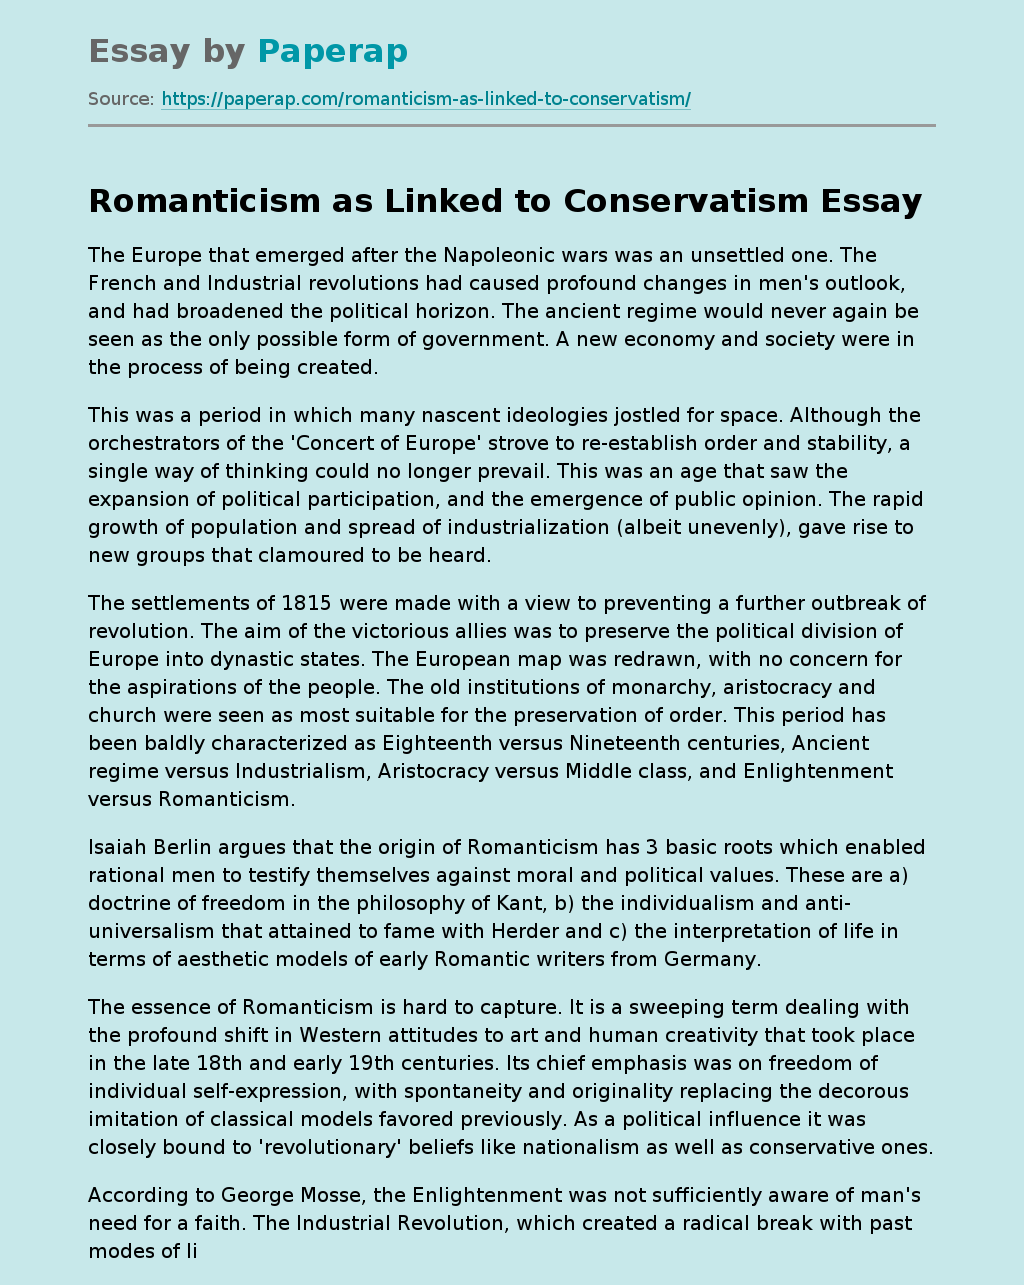 Romanticism as Linked to Conservatism